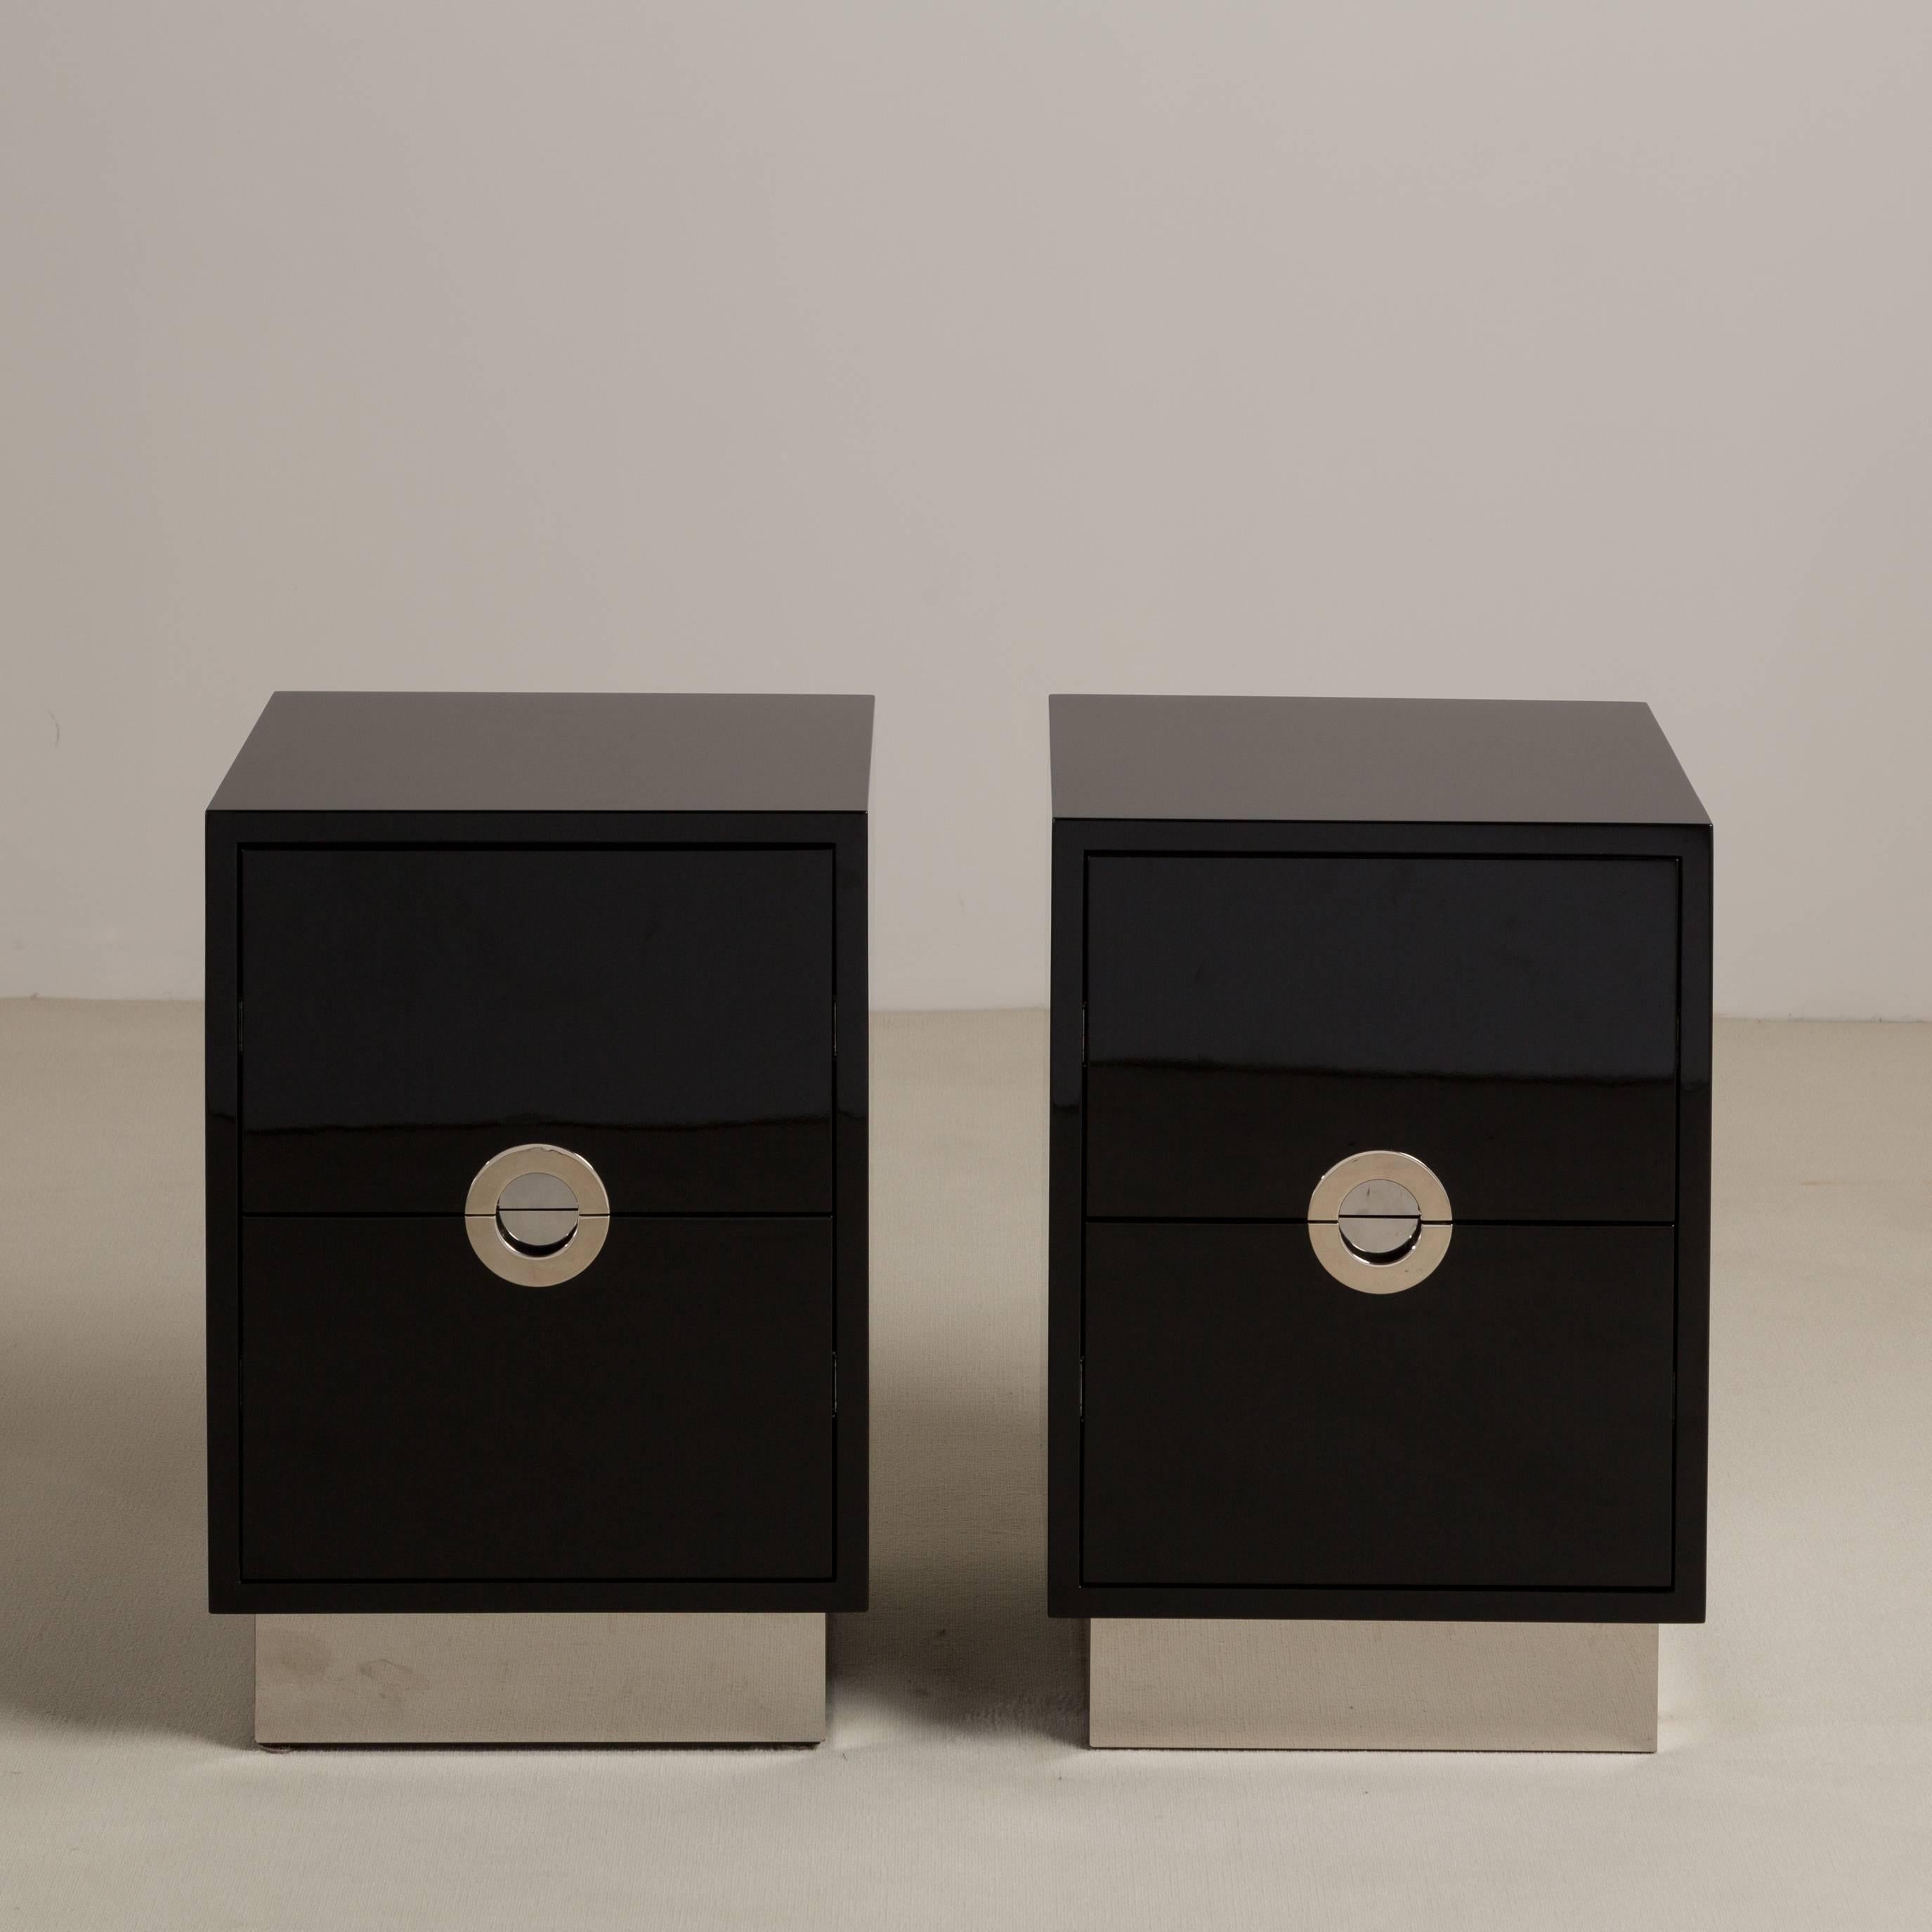 A standard pair of jet black lacquered porthole bedside cabinets by Talisman Bespoke

This 1970s inspired design is available in a wide range of lacquer colours (Ral/paint colours can be specified) with either brass or steel metalwork. These bedside